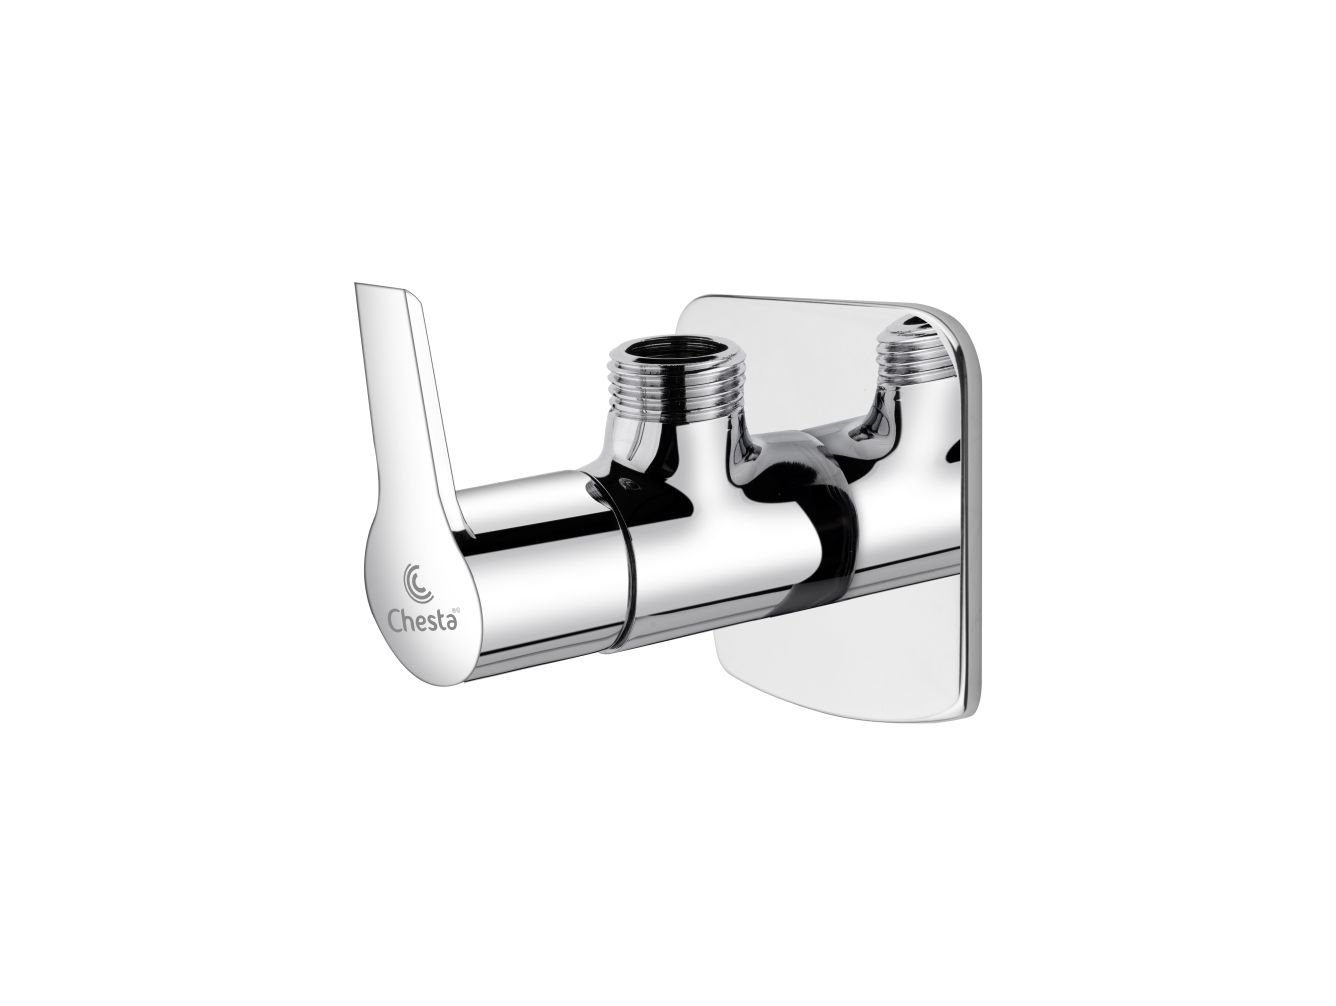 DY - 1003 - Angle Cock with Wall Flange by Chesta Bath